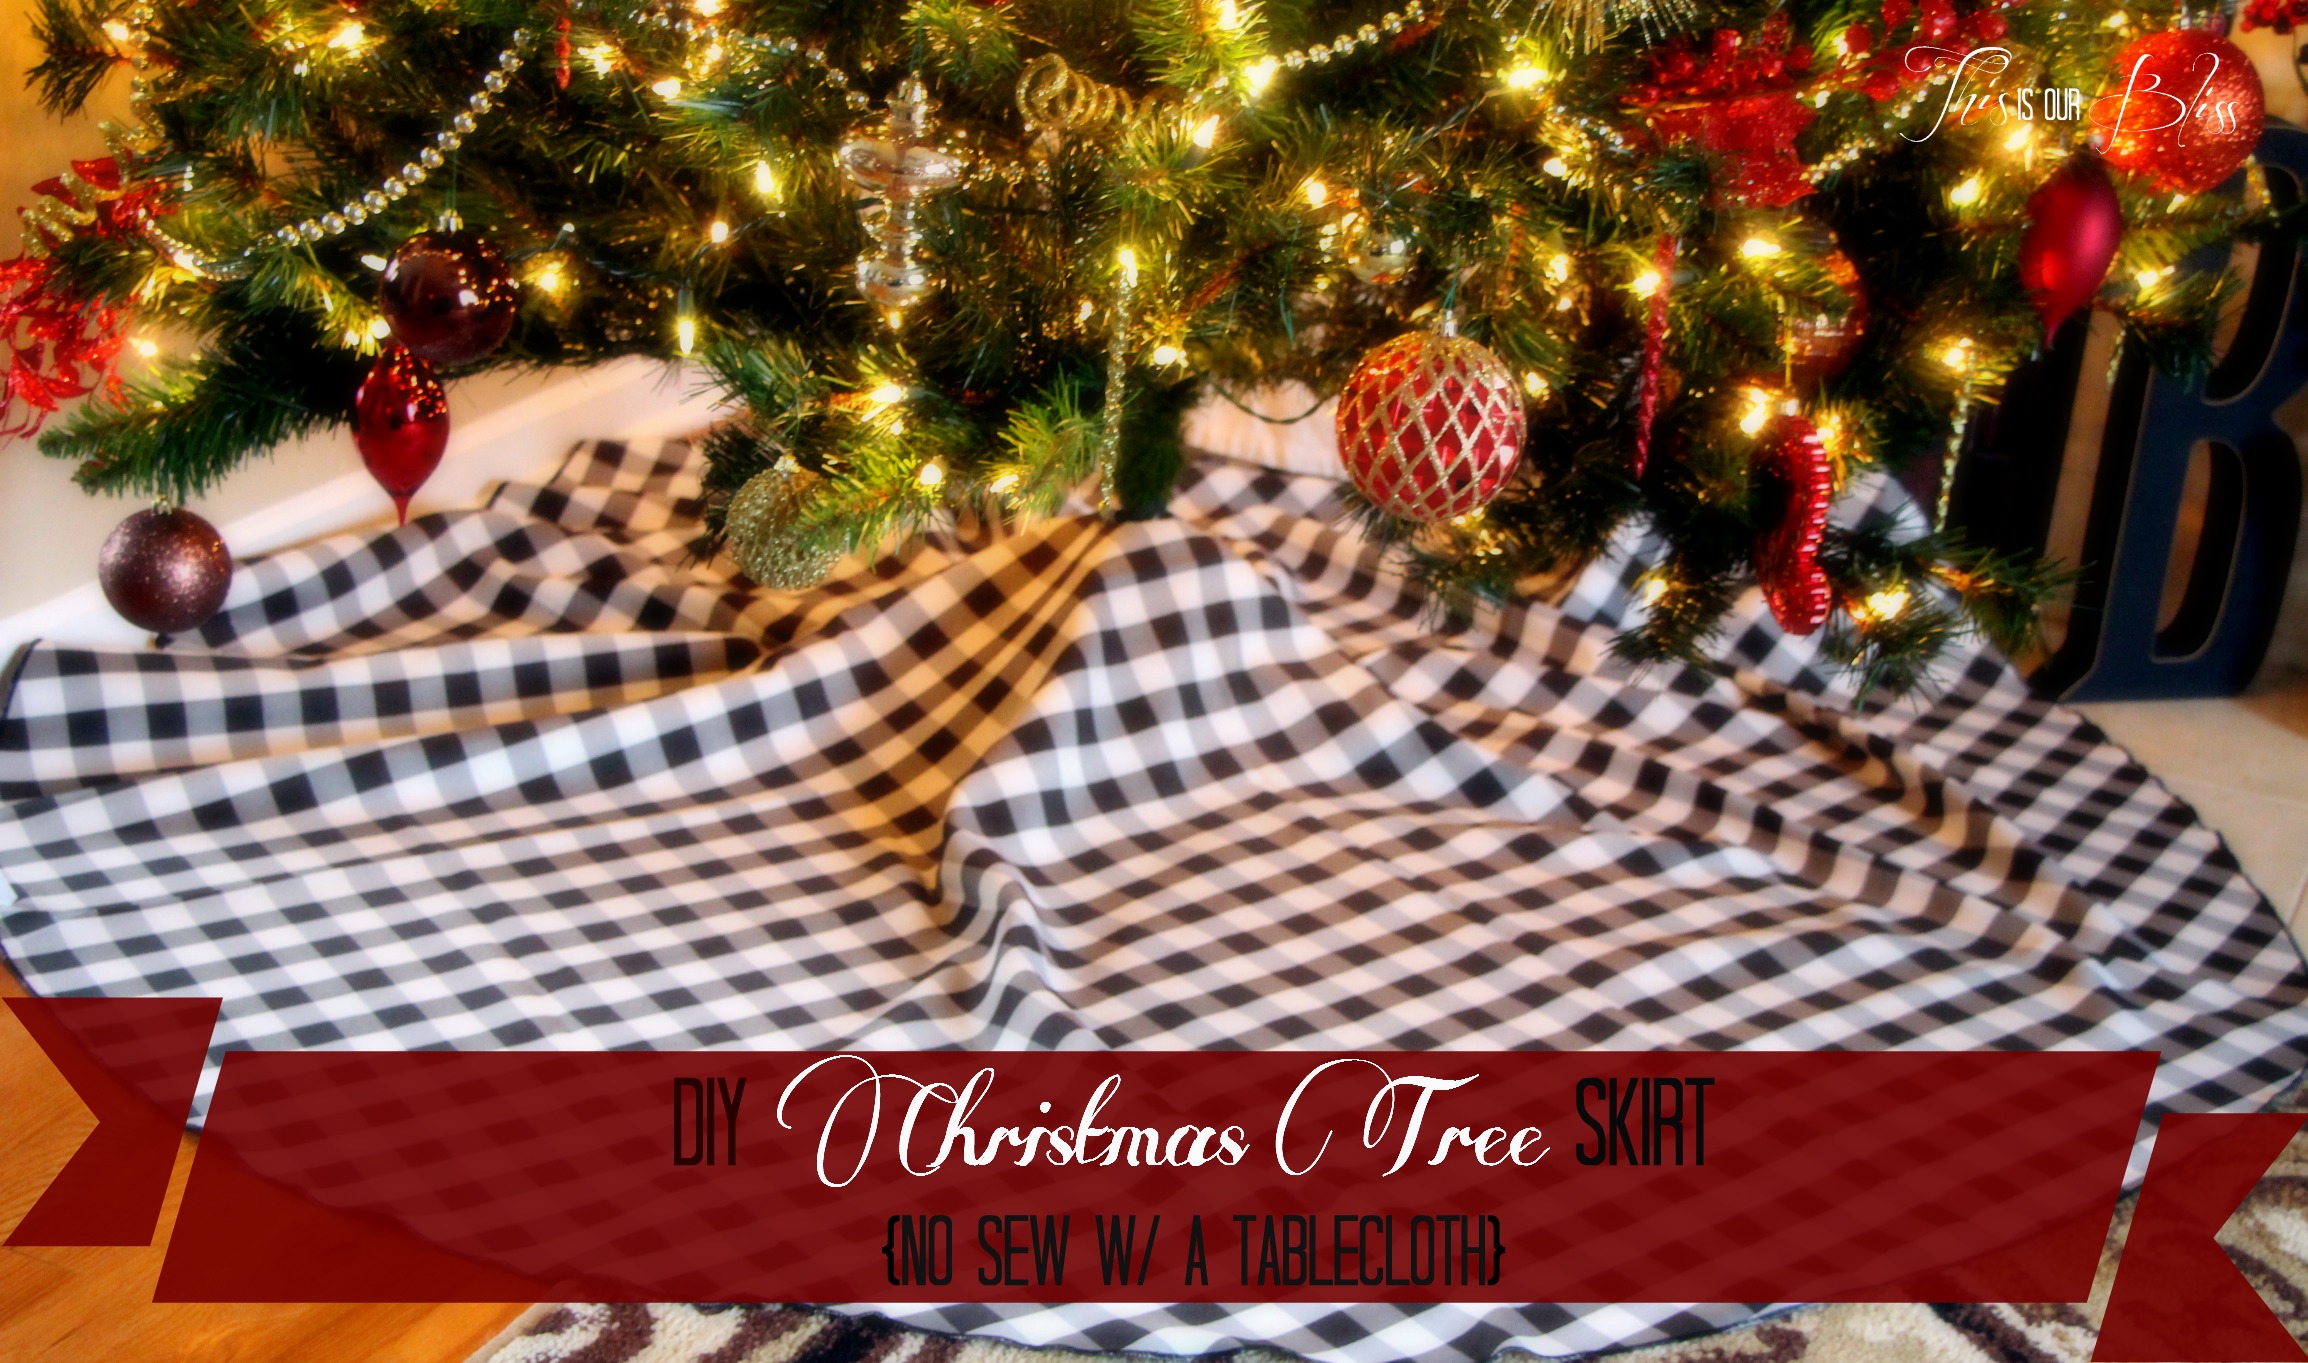 DIY Tree skirt - round tablecloth - no sew with a tableloth